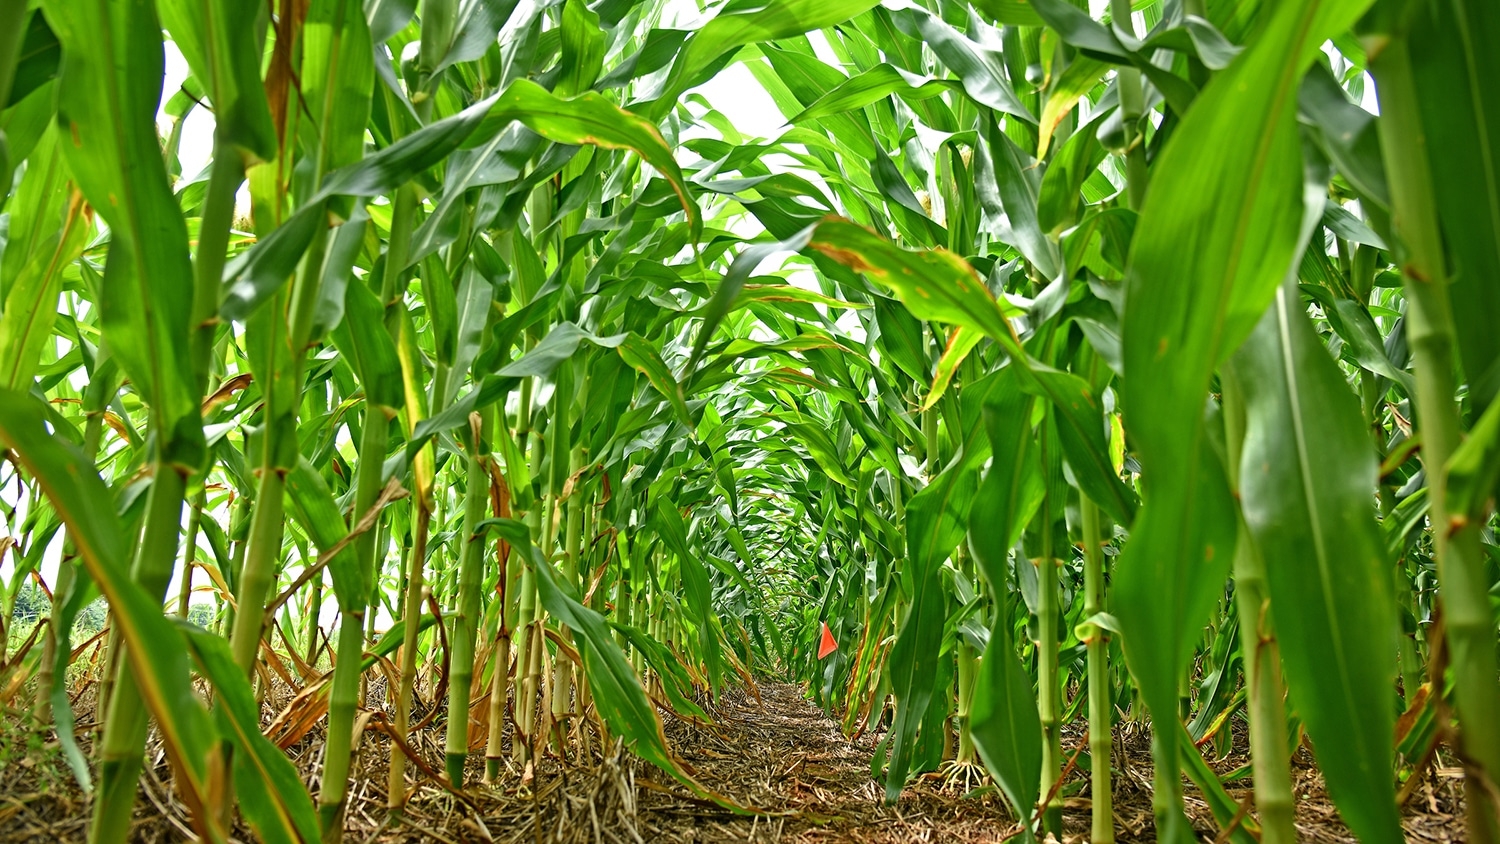 A close-up image of rows of corn in a field